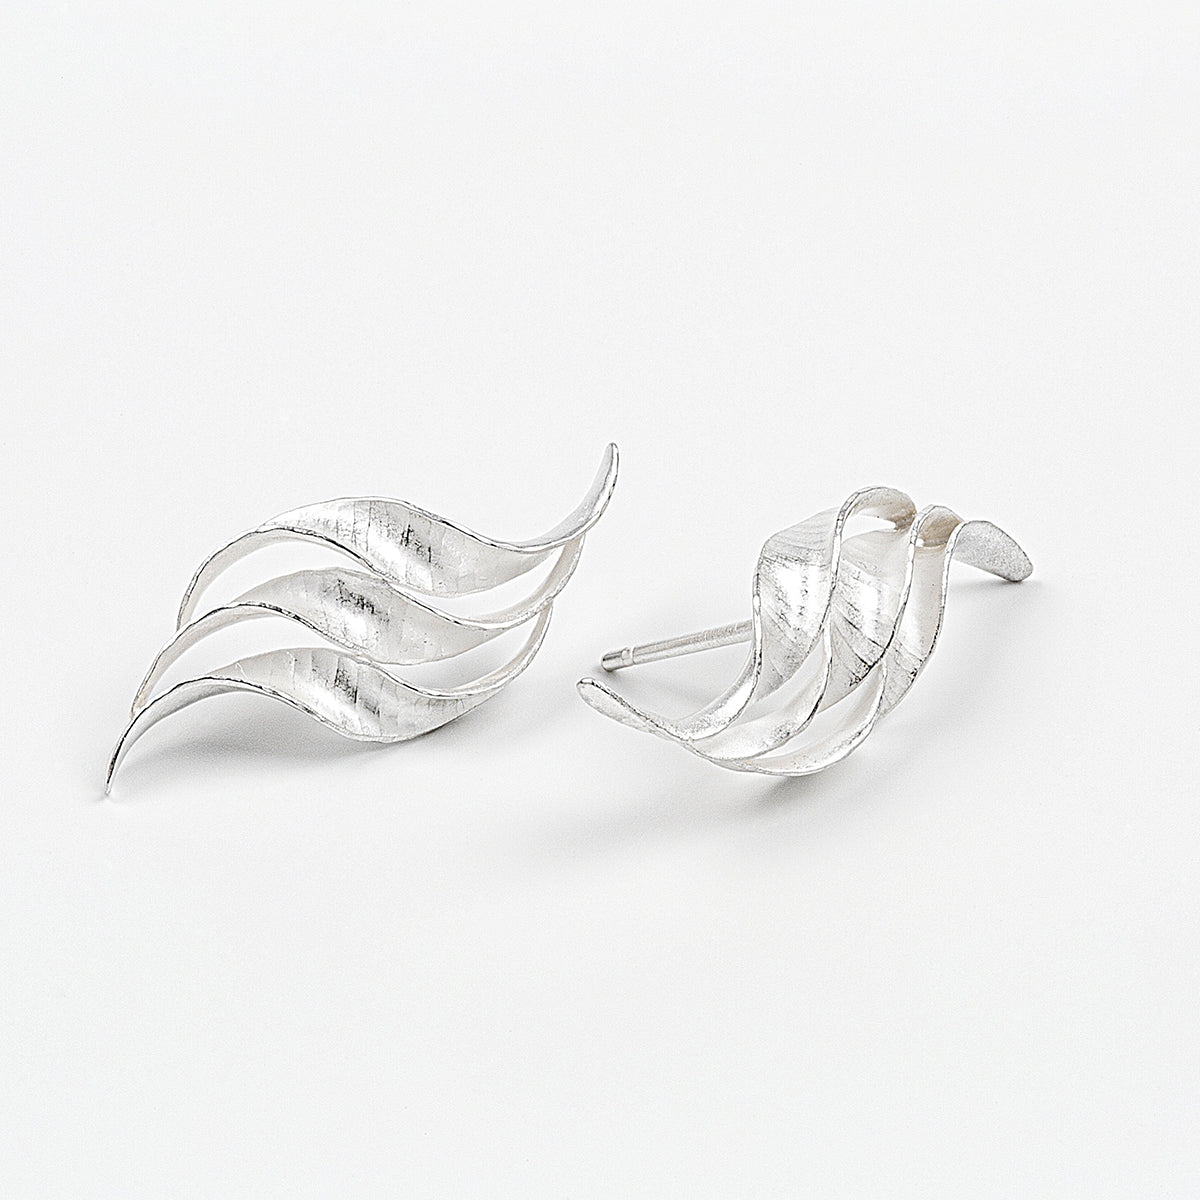 A pair of silver wedding earrings in the form of a triple wave of parallel curling, twisting S-shapes. They have a hammered texture, non-reflective surface and burnished edges.  This image shows one earring from the front and the other from the side.